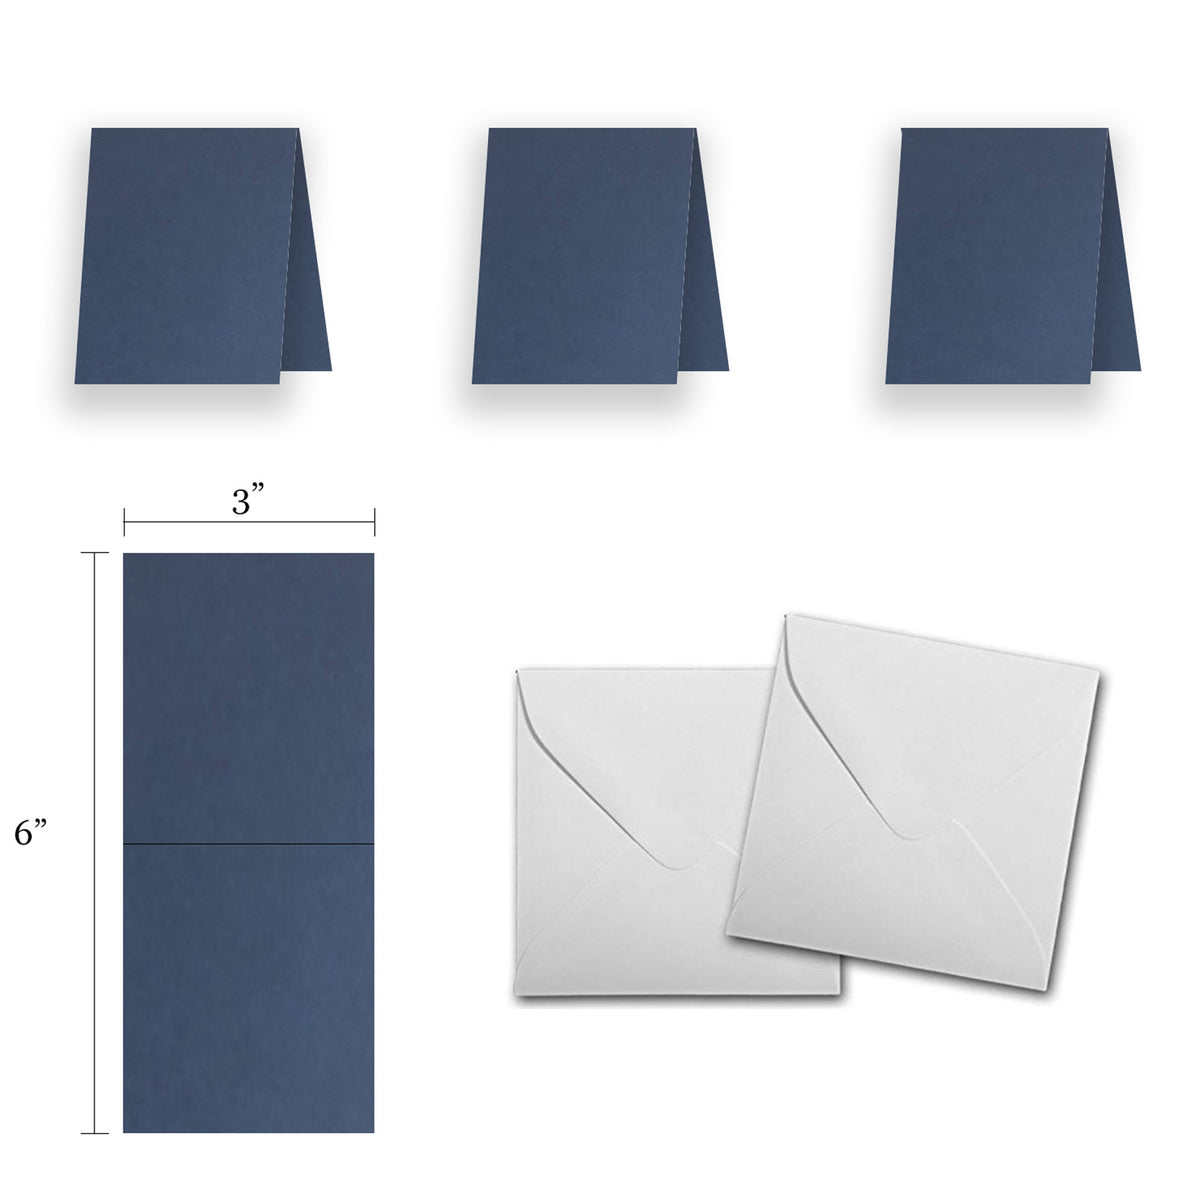 Blank Navy 3x3 Folded Discount Card Stock and Envelopes